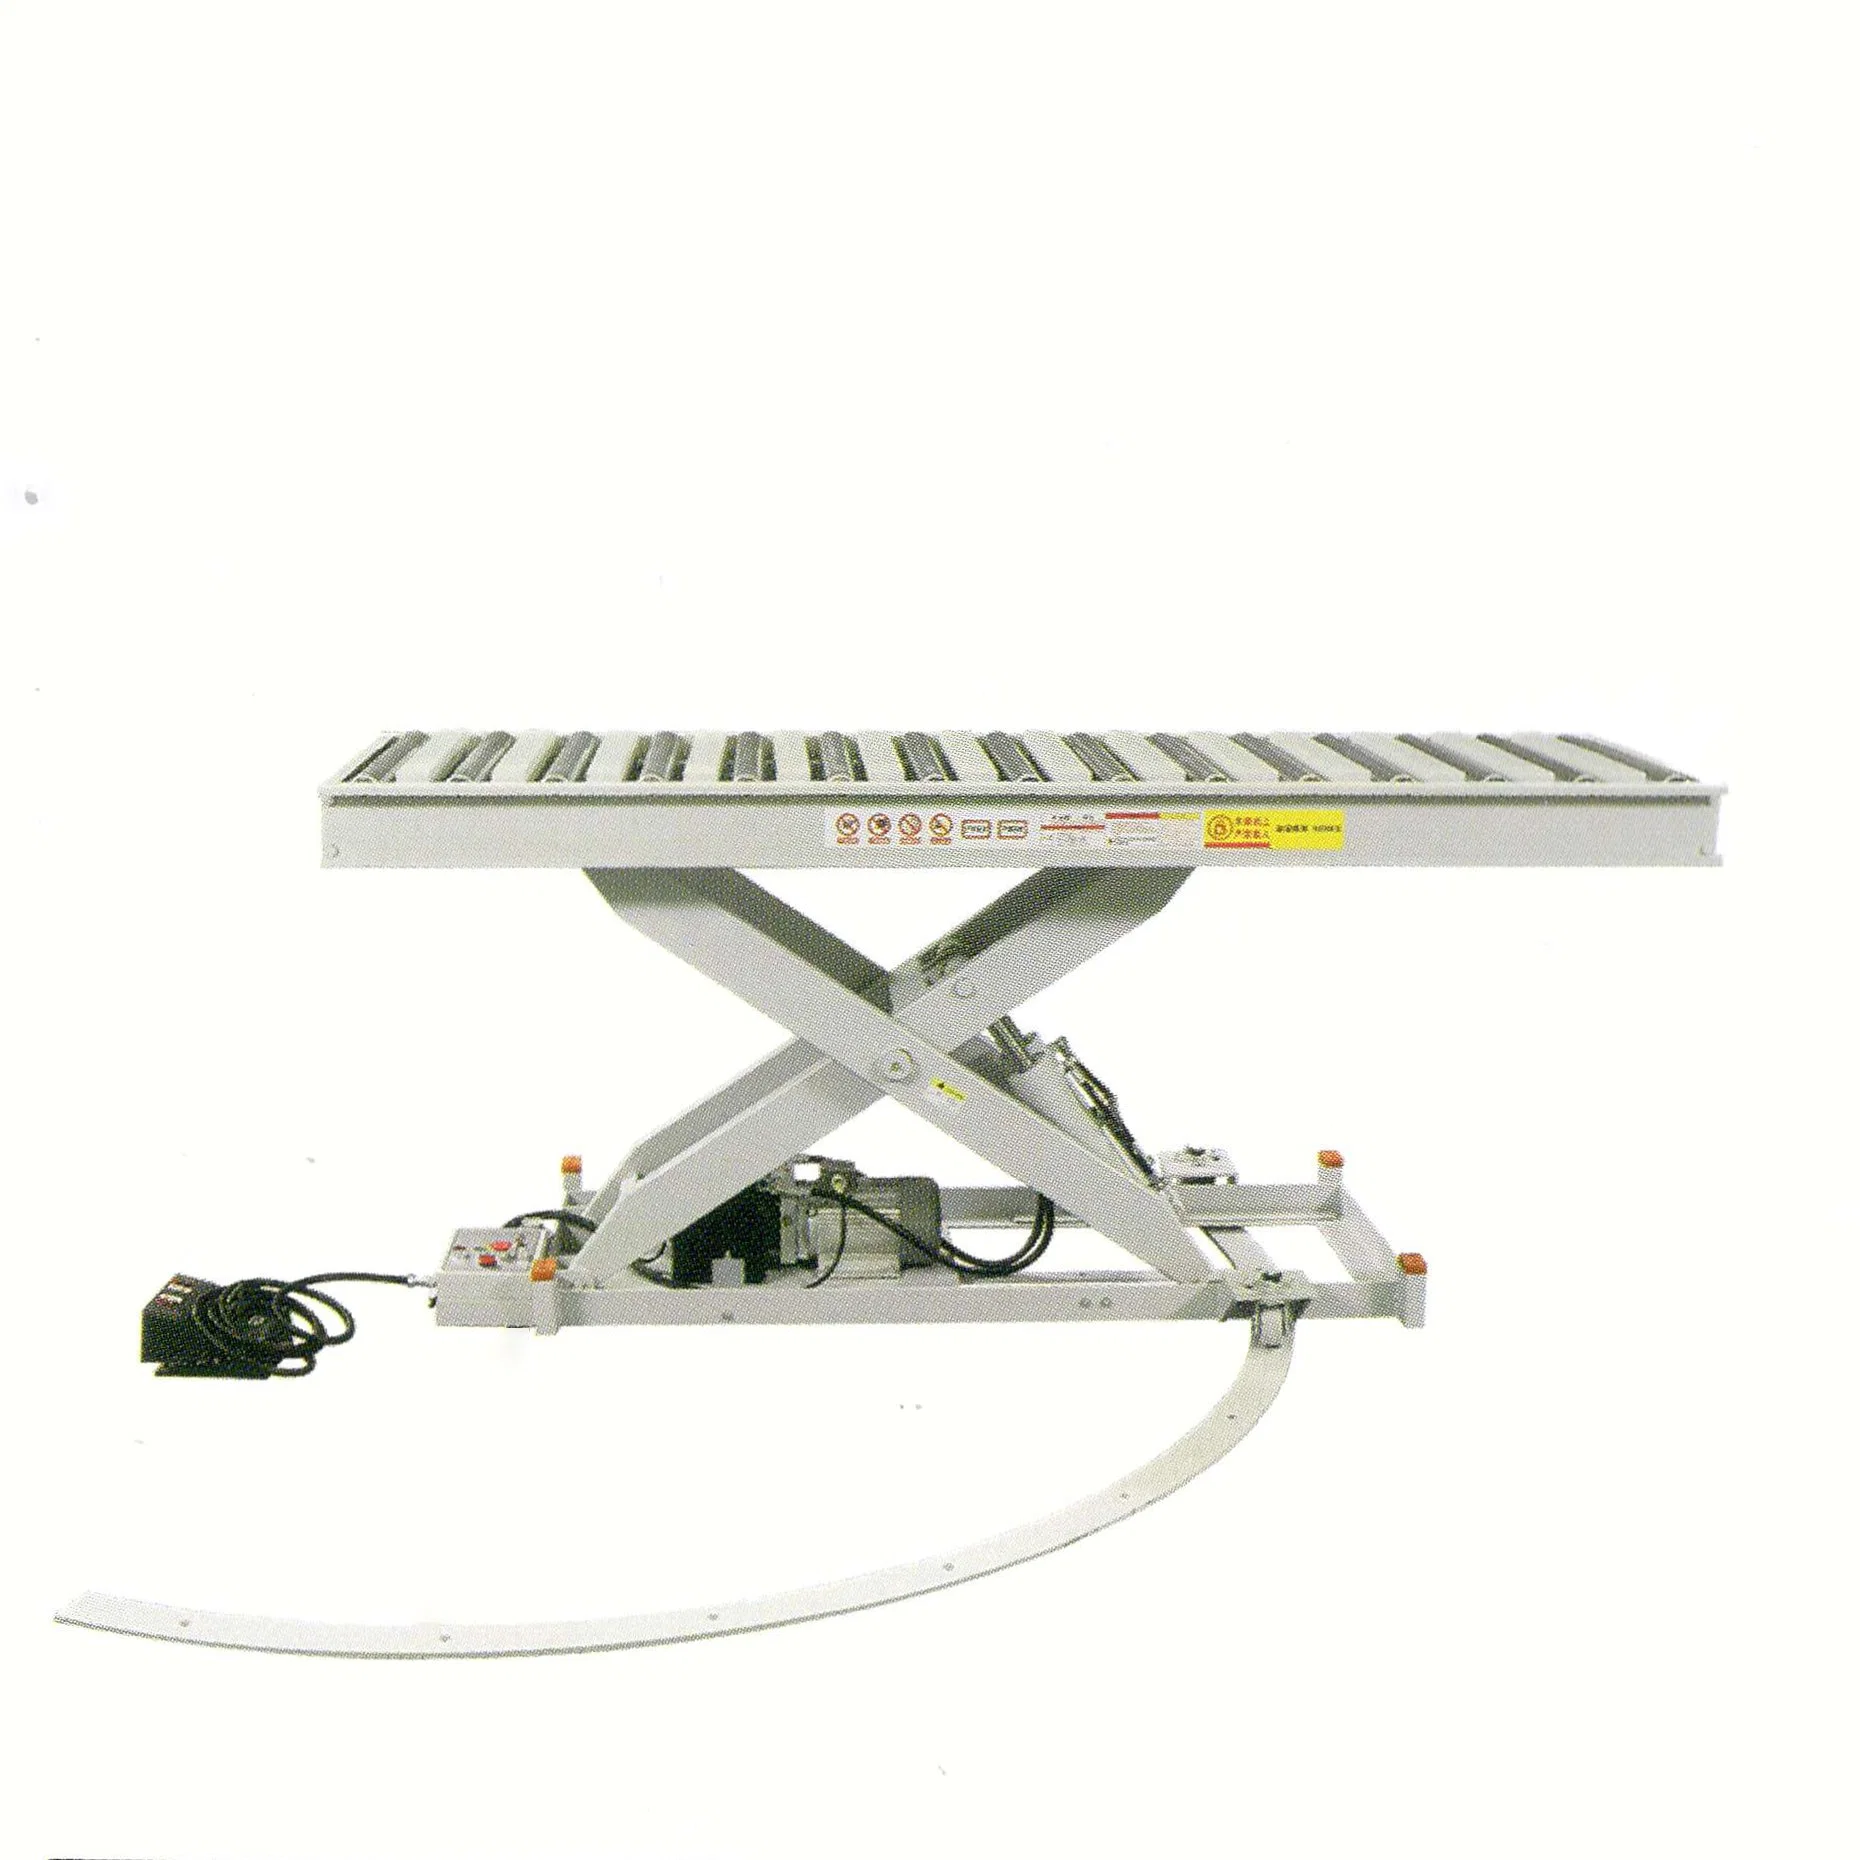 High Speed Stable Lifting Equipment, Fast and Efficient